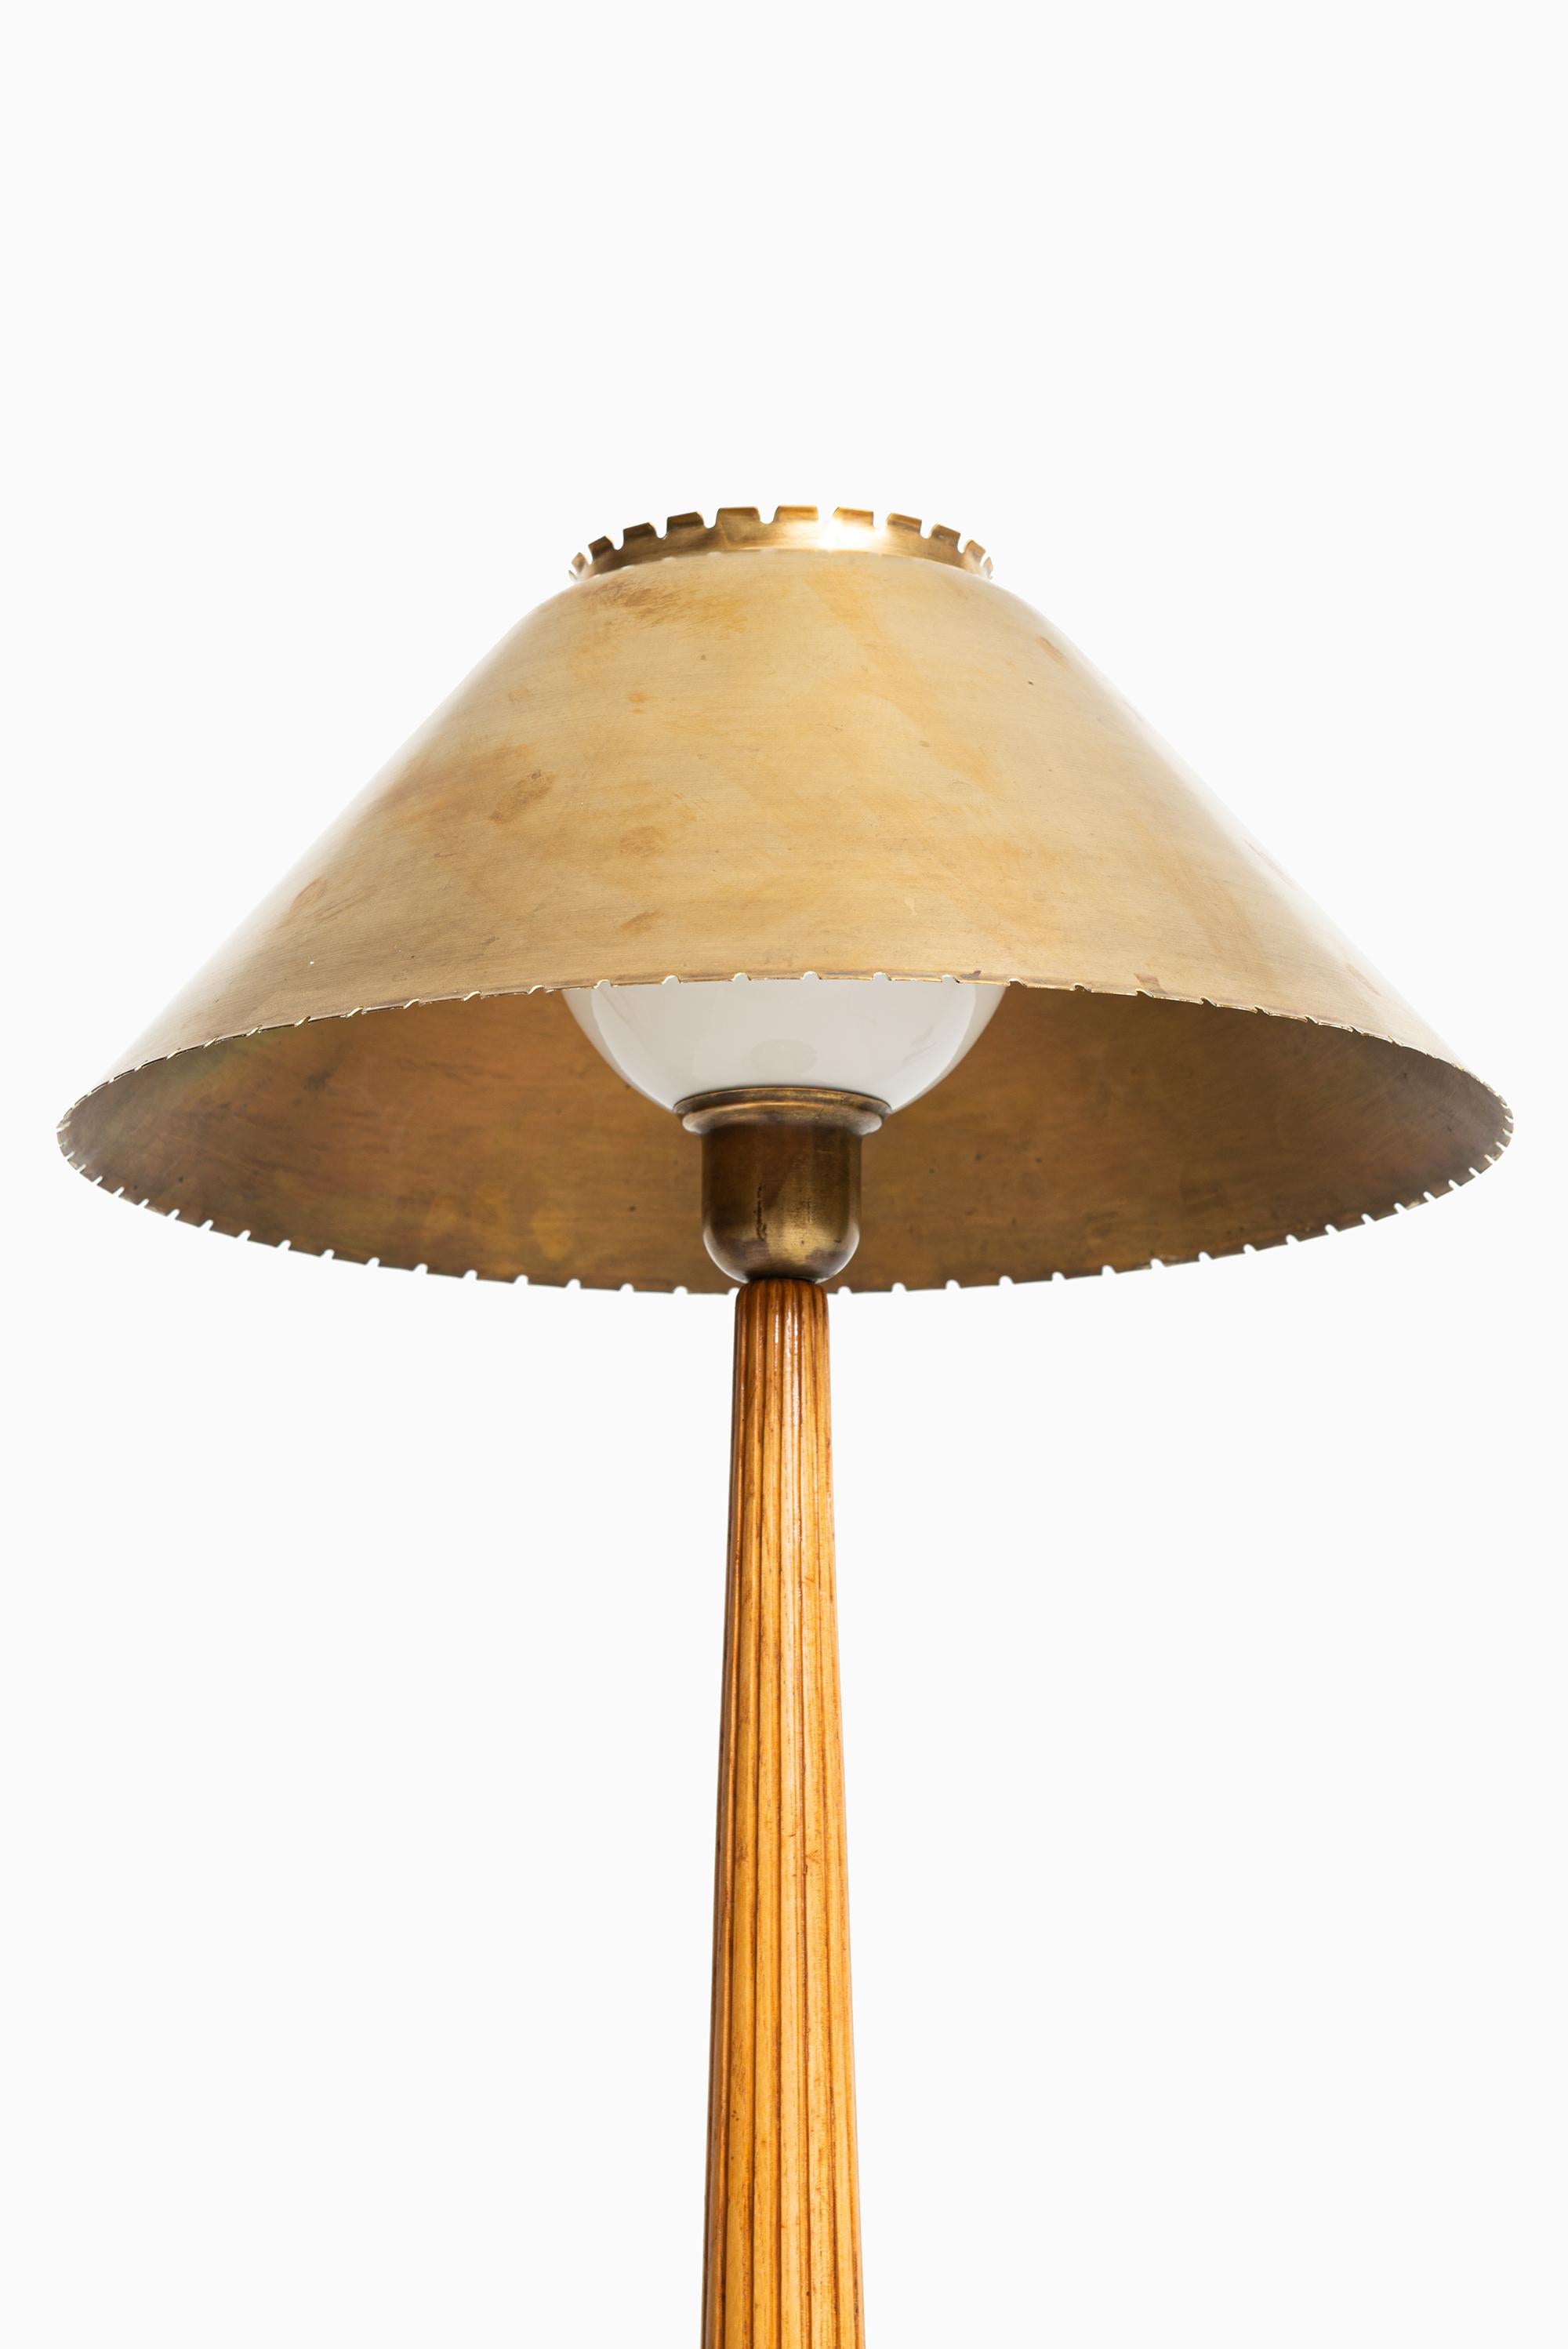 Rare table lamp designed by Hans Bergström. Produced by ASEA in Sweden.